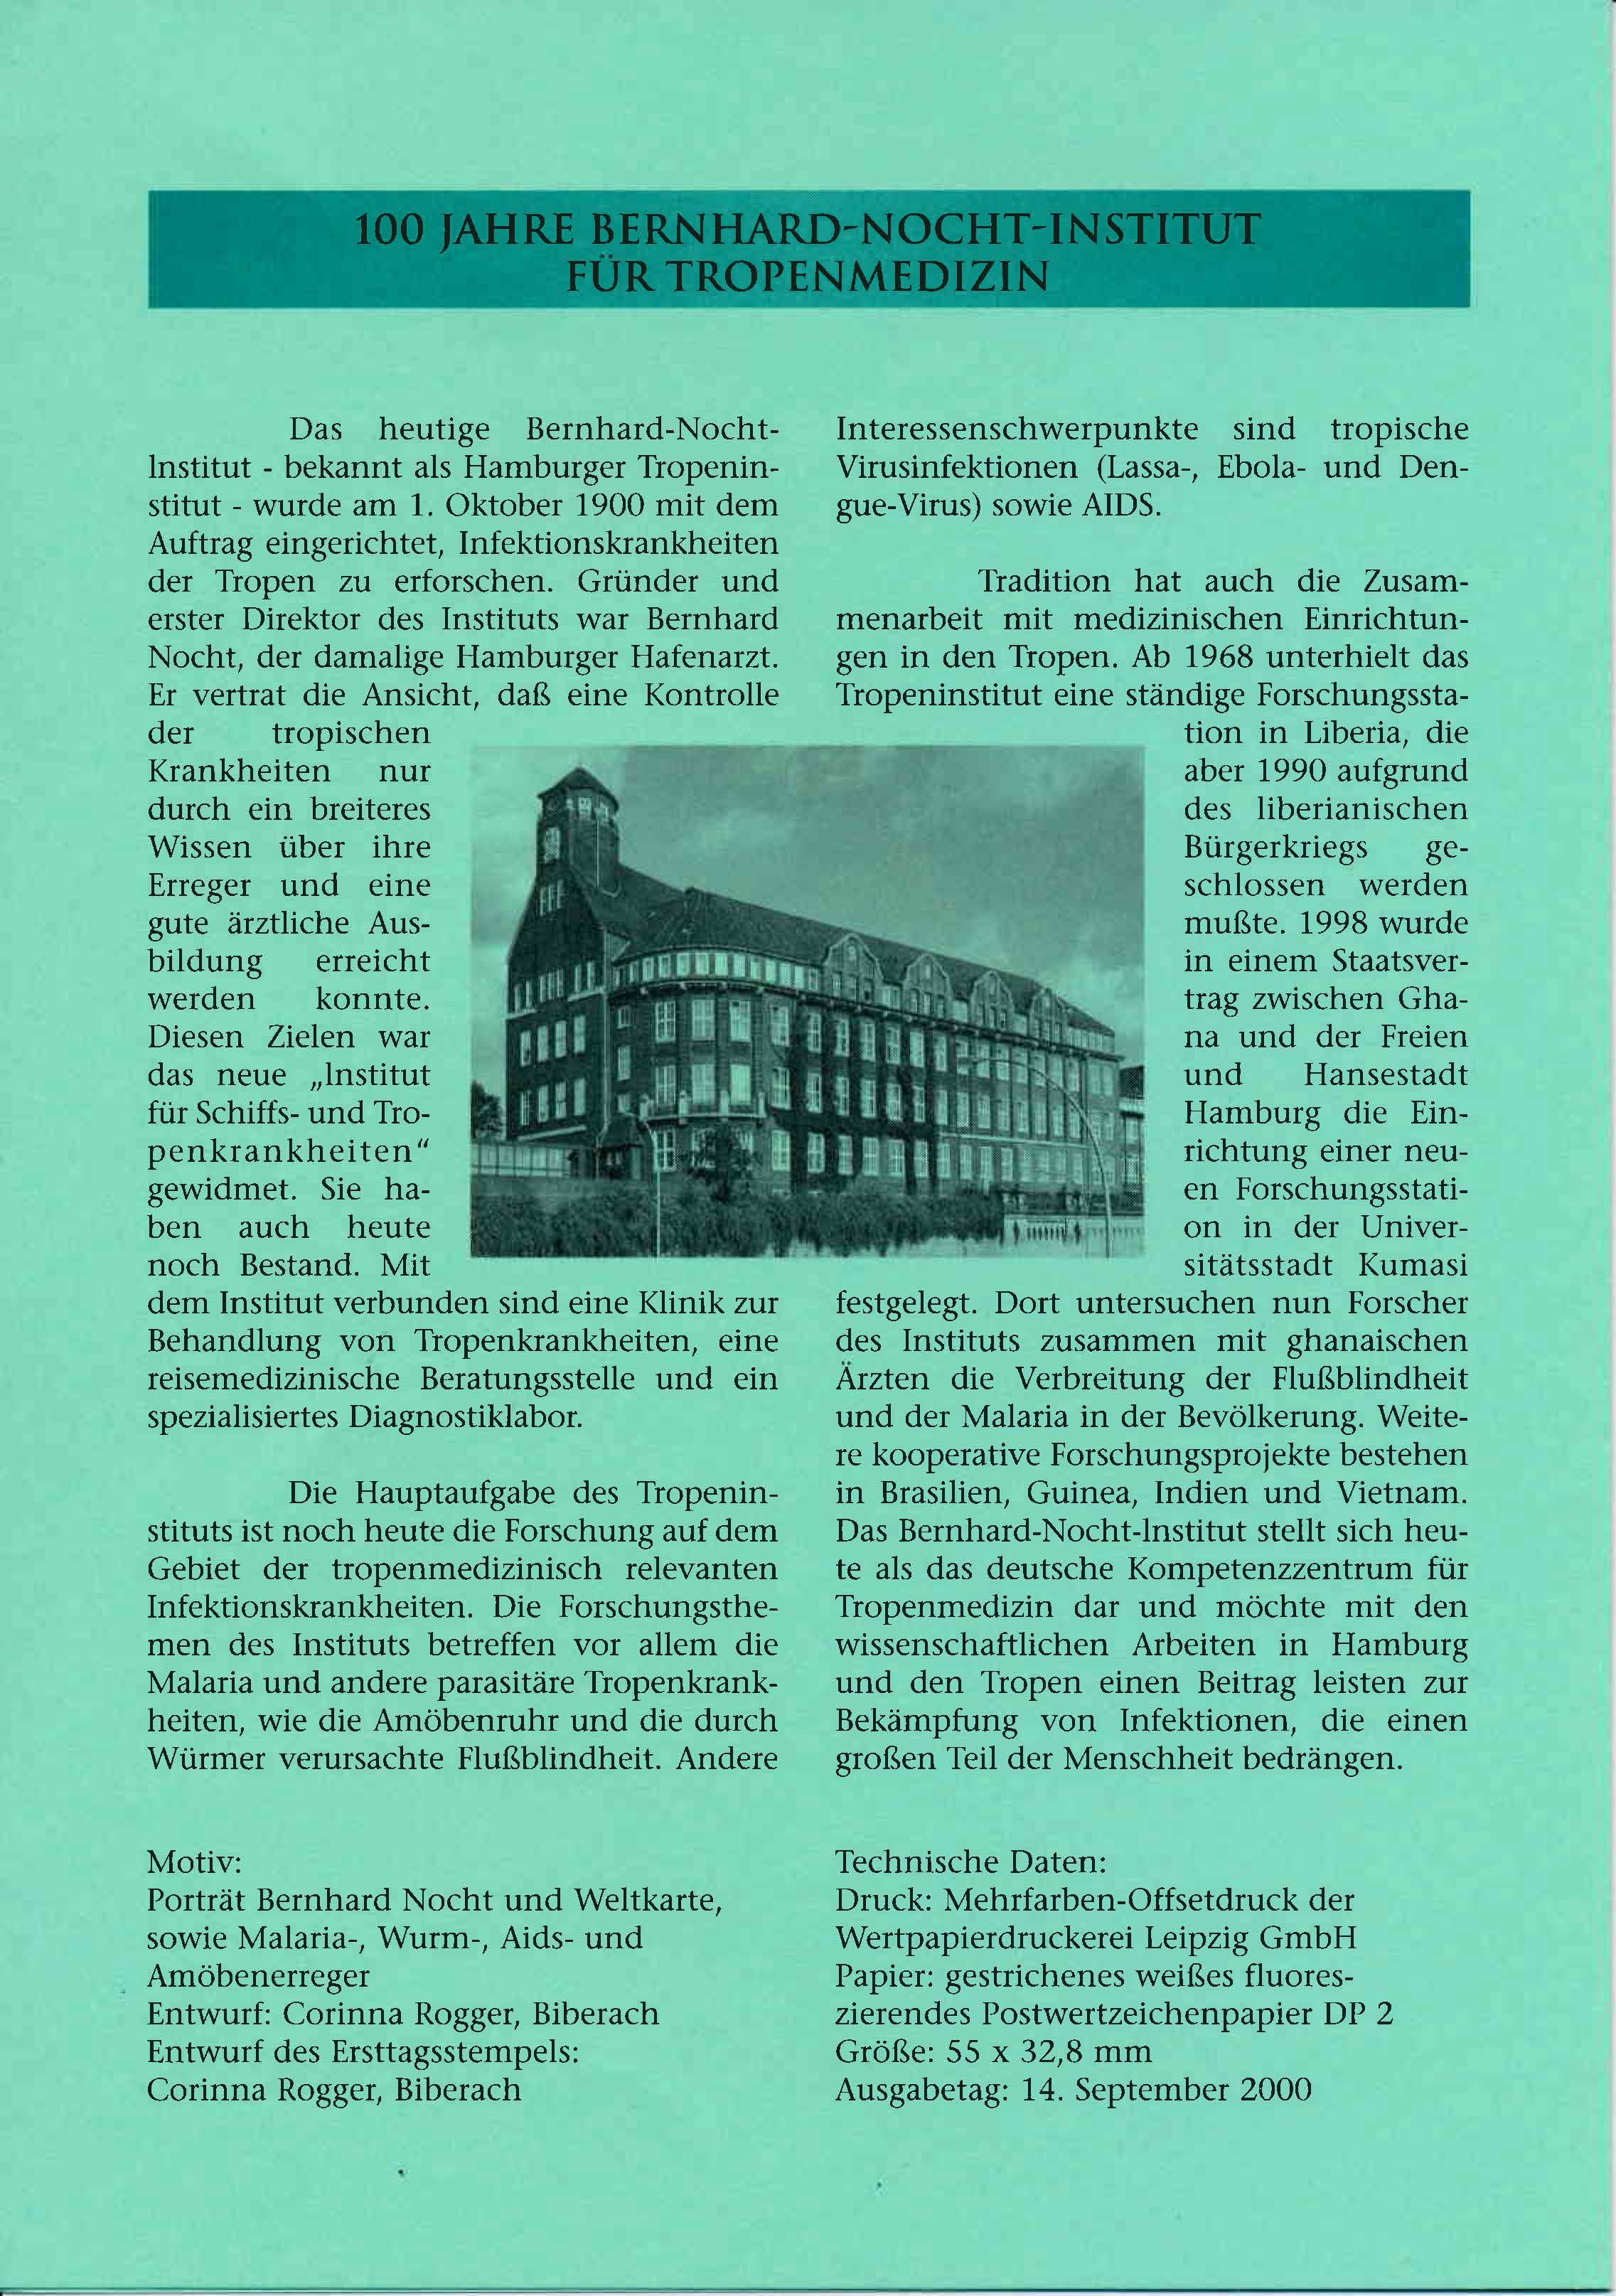 Germany Scott 2101 Post Office Booklet - Page 2